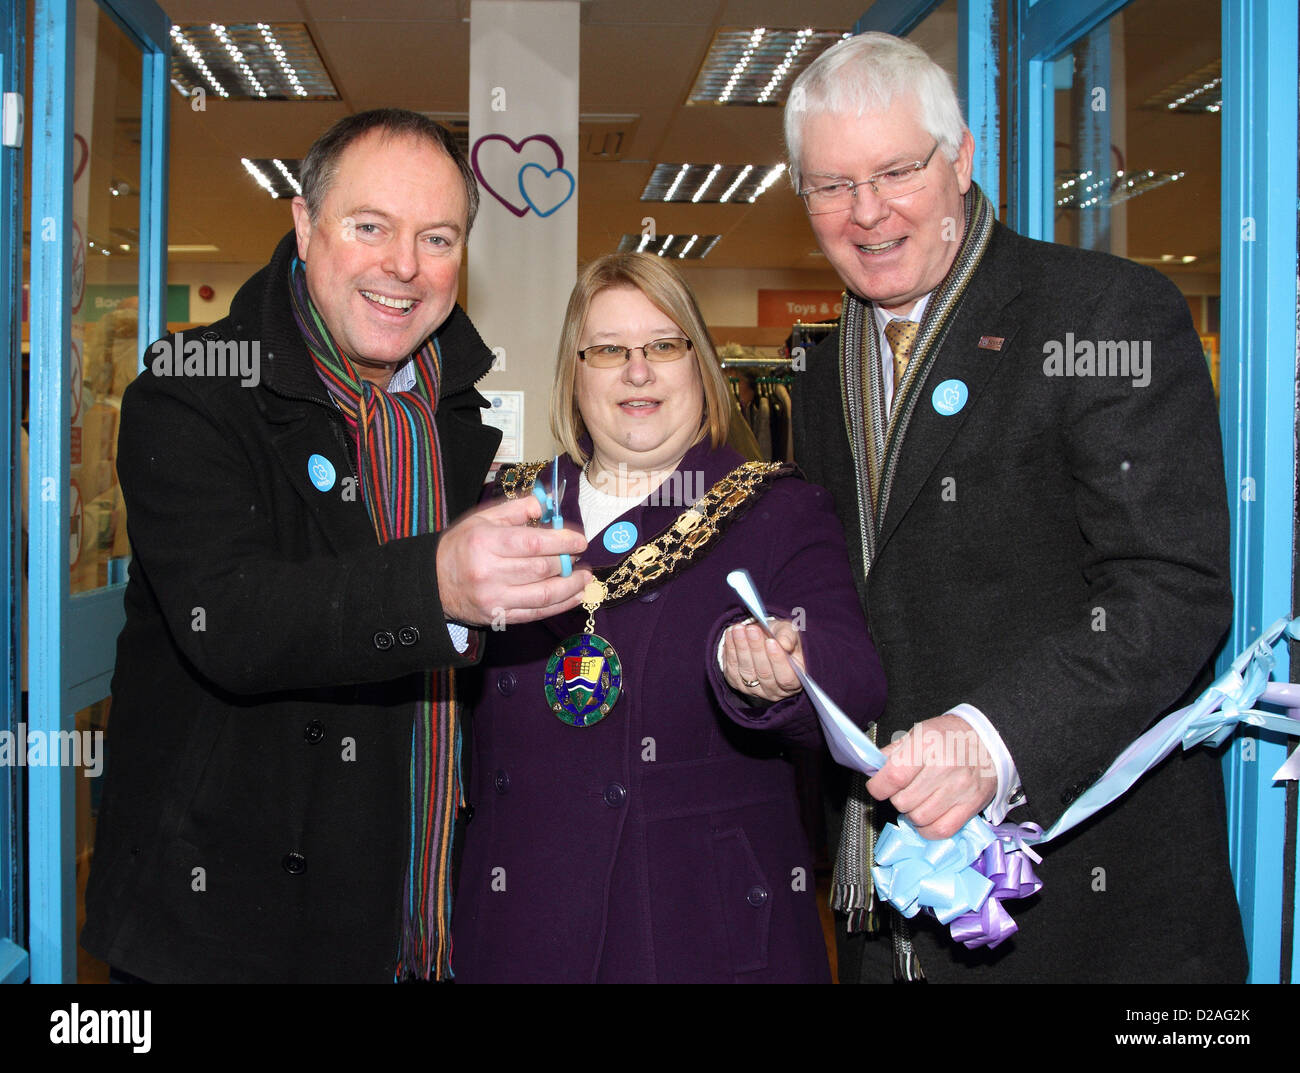 Bedfordshire - Prime Minister opens Keech Hospice Charity Shop in Sandy, Bedfordshire.  Actor Robert Daws, currently playing Jim Hacker in the West End production of  'Yes Prime Minister' interrupted his affairs of the state to formally open the new Keech Hospice flagship store in Sandy, Bedfordshire. Accompanied by the town's lady Mayor and Keech CEO Mike Keel.- January 18th 2012  Photo by Keith Mayhew Stock Photo